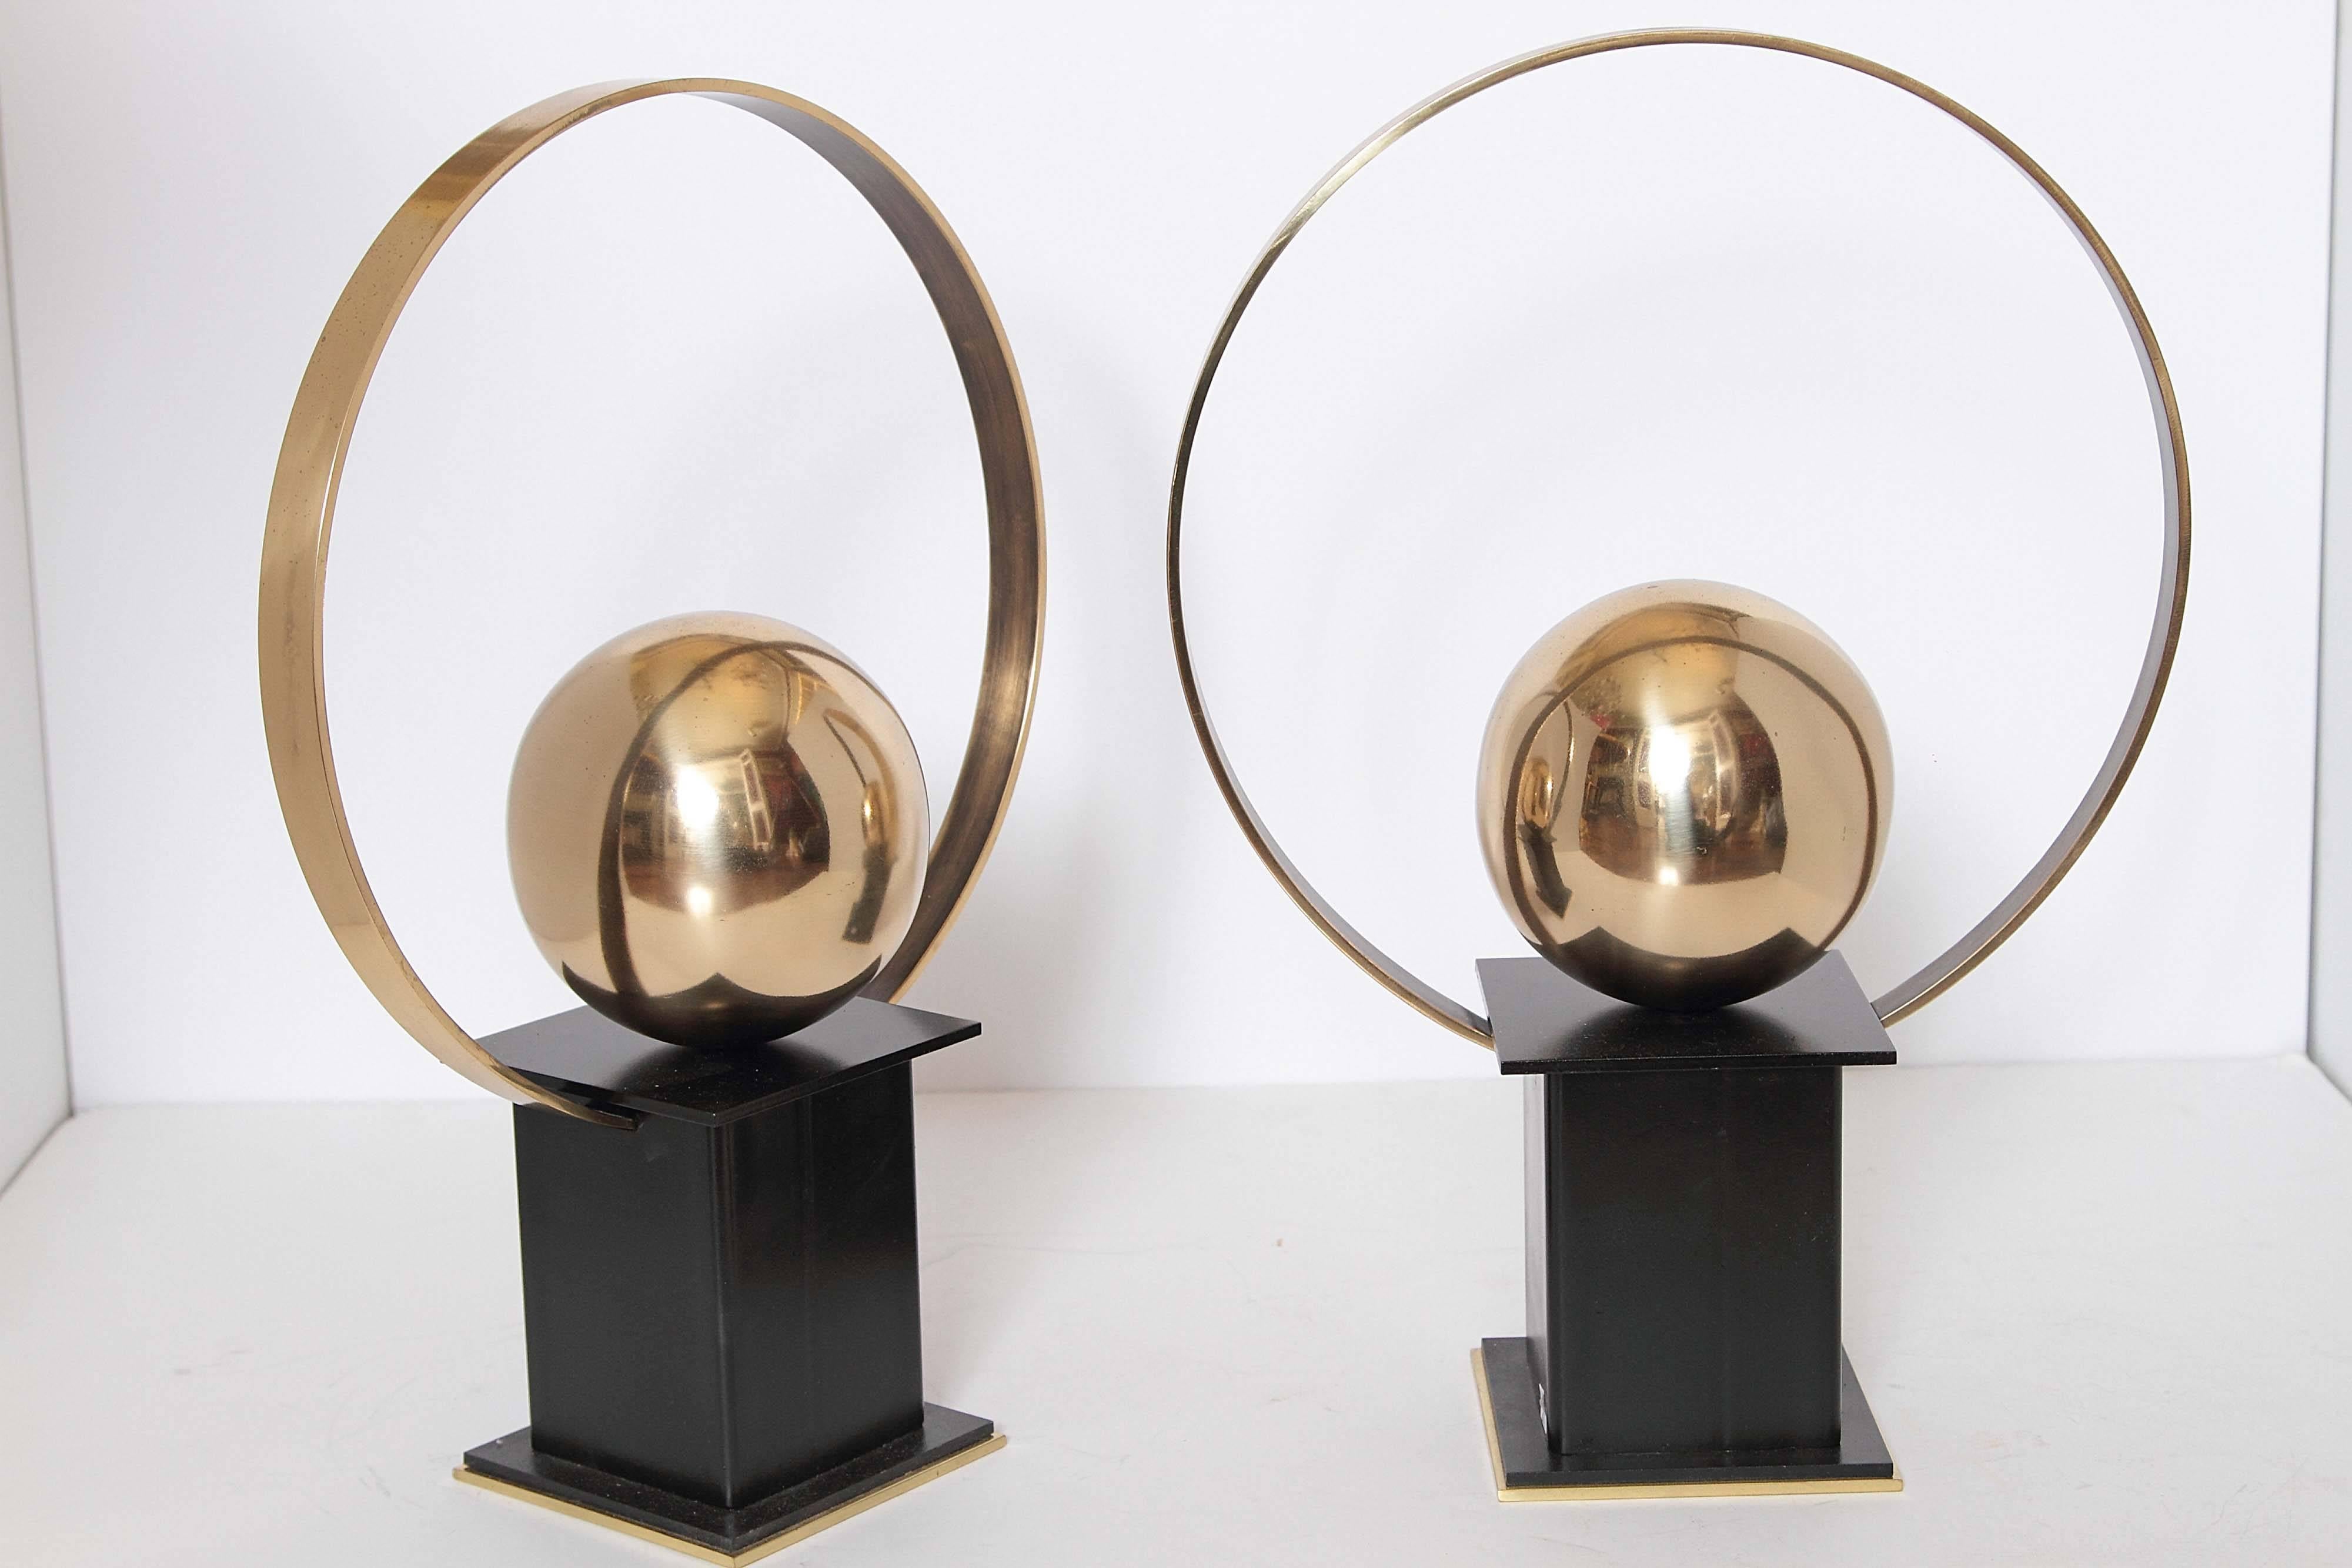 Pair of custom-made lack and gold andirons designed by Sherry Hayslip for Whitesmith & Company. The circular steel haloes surrounding the polished brass spheres are placed on black steel bases.